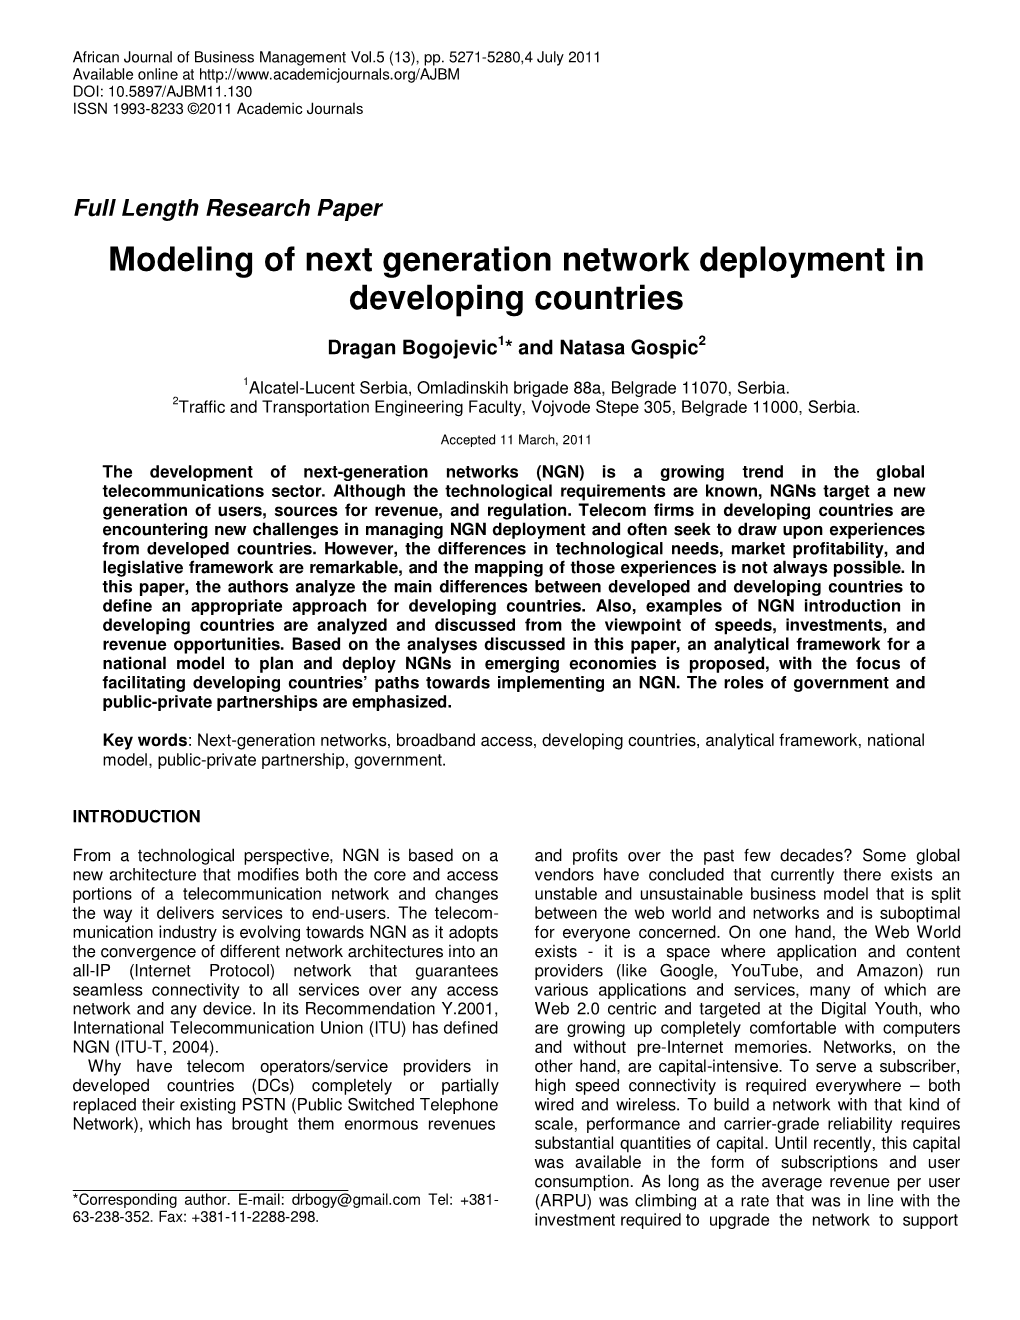 Modeling of Next Generation Network Deployment in Developing Countries